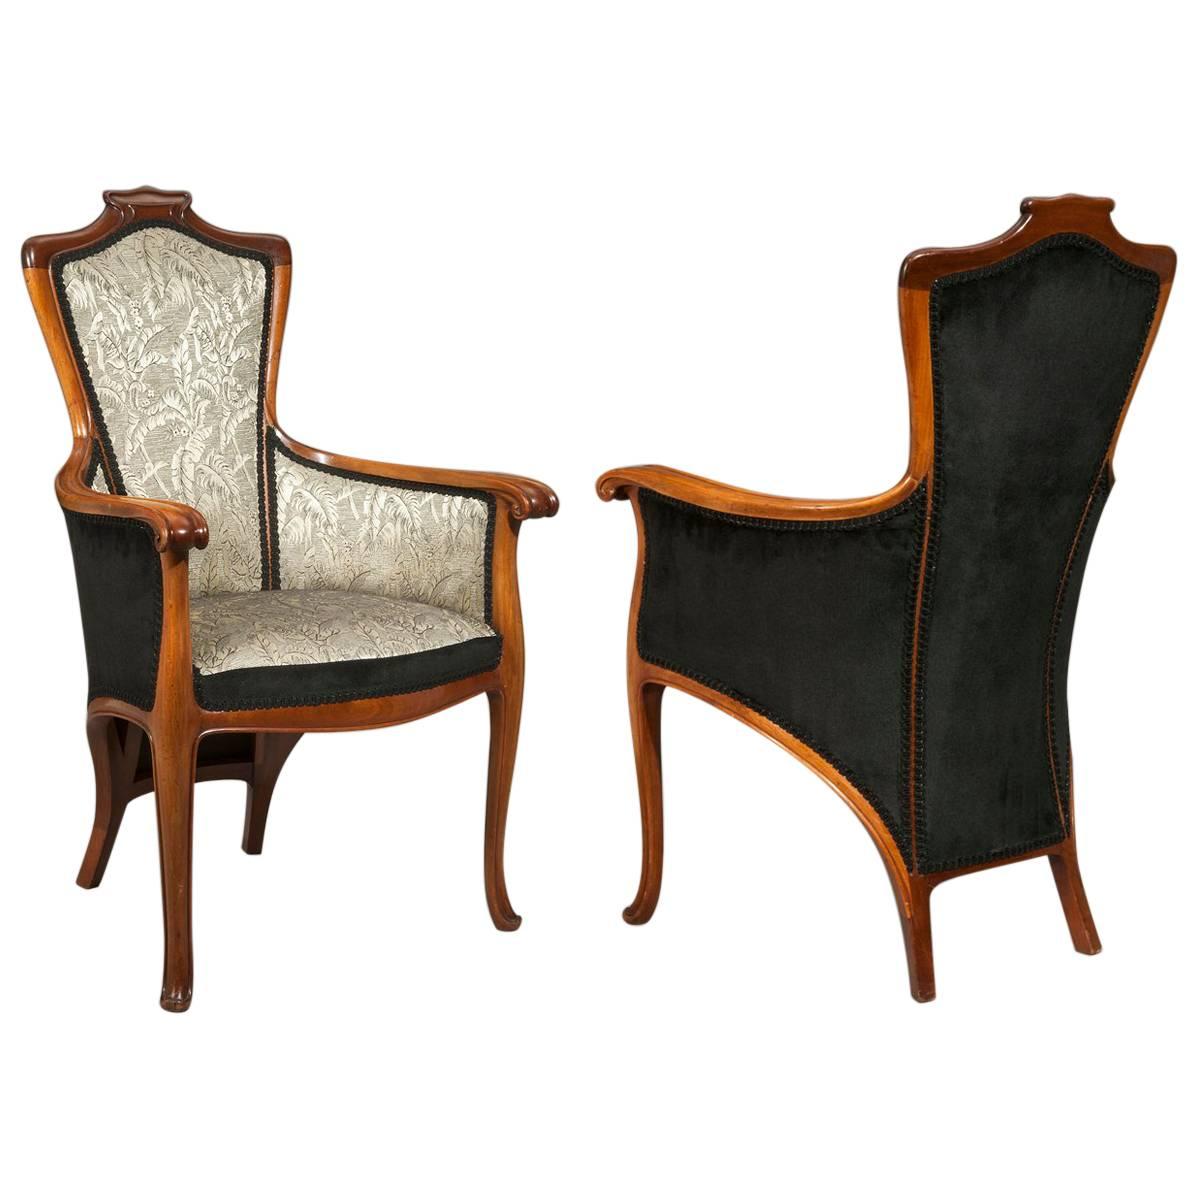 Edouard Colonna, Pair of Art Nouveau Carved Walnut Armchairs For Sale